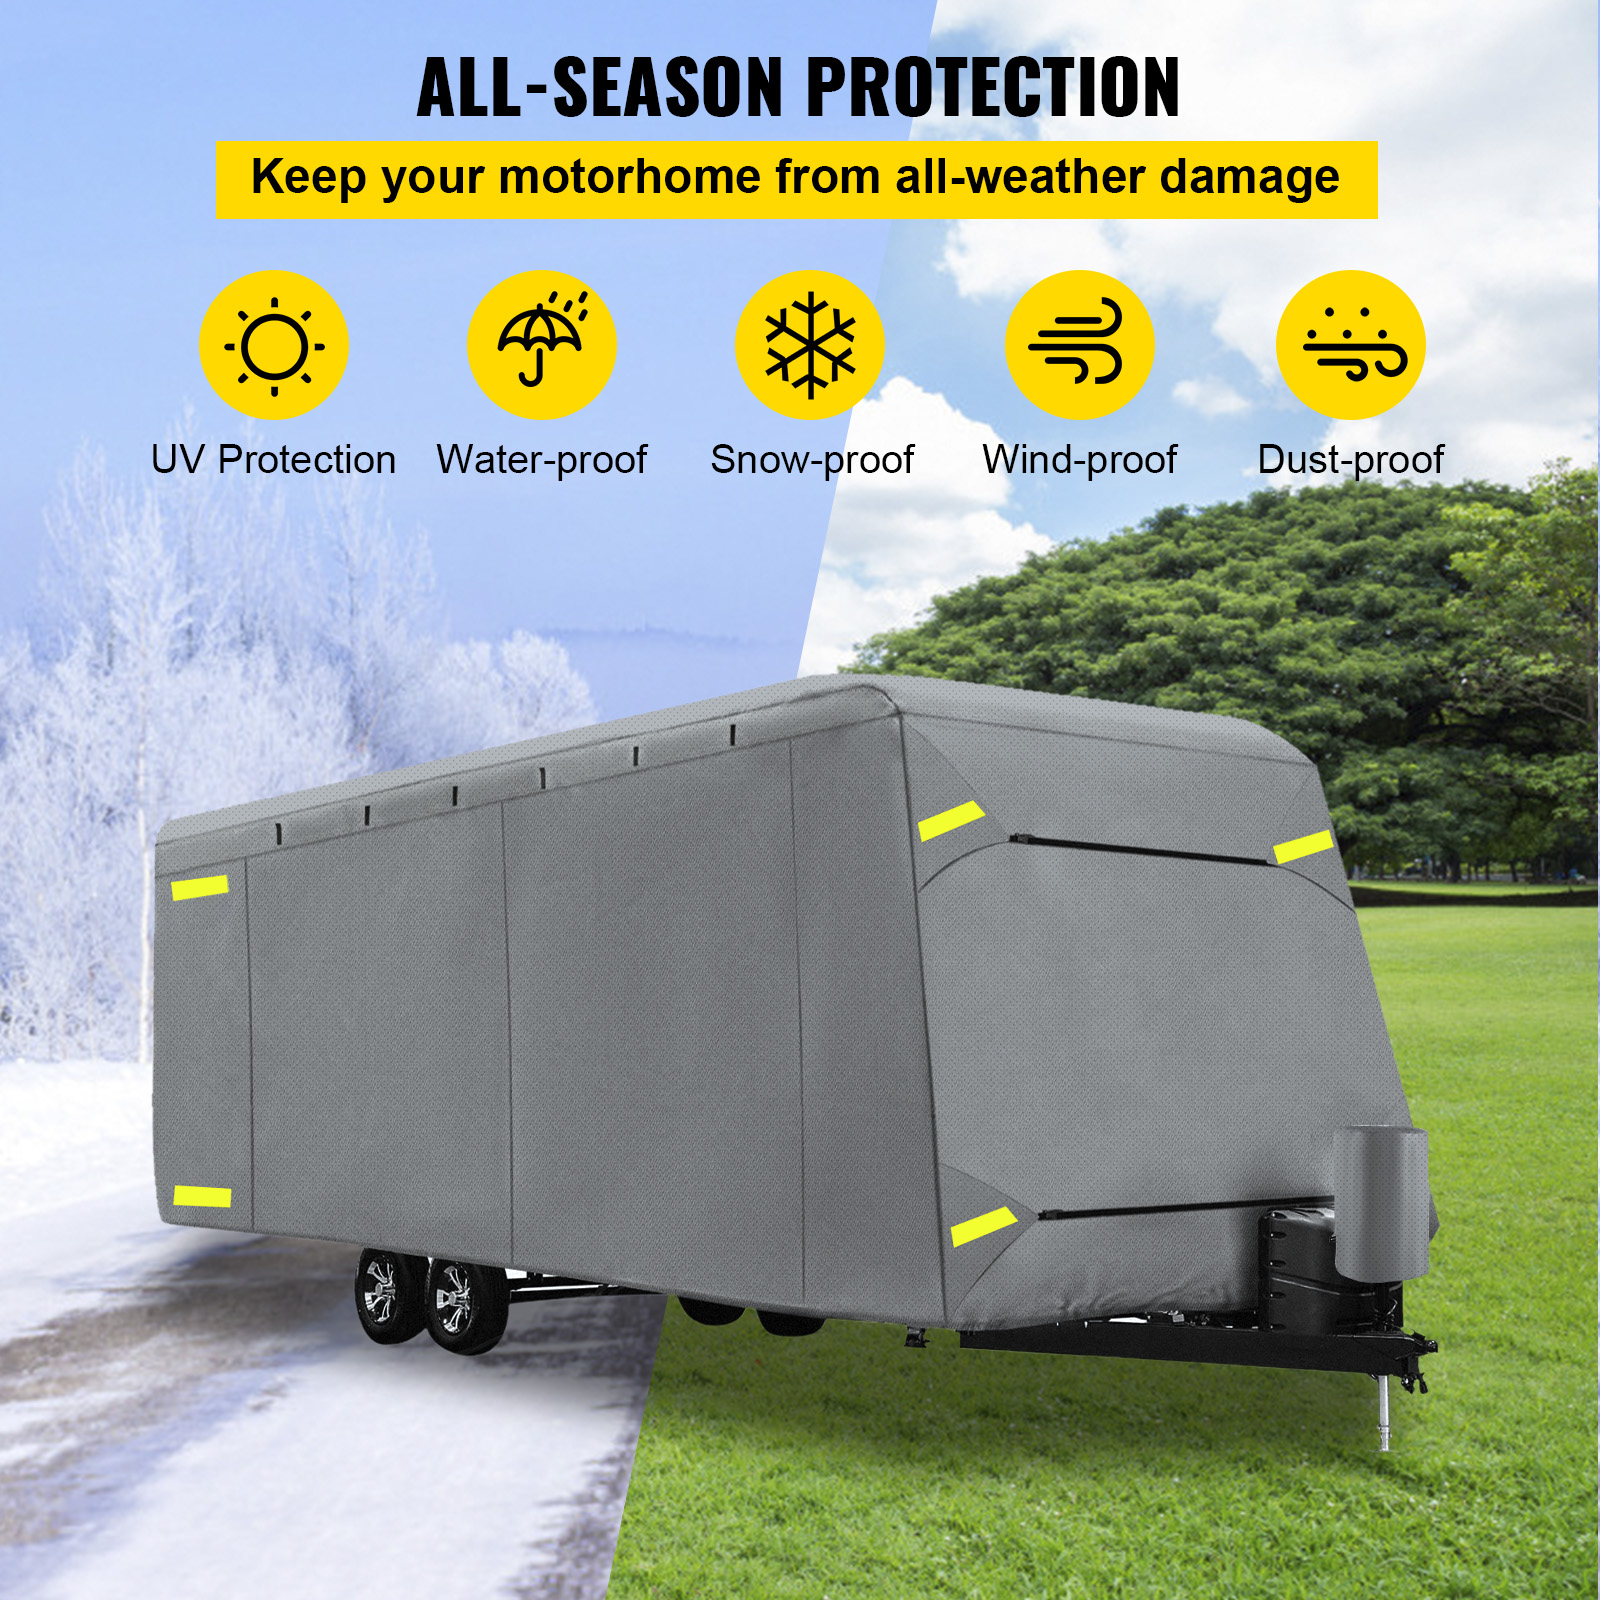 VEVOR RV Cover 18'-20' and Extra-Thick 4 Layers Travel Trailer RV Cover Durable Camper Cover, Waterproof Breathable Anti-UV Ripstop for RV Motorhome with Storage Bag - image 4 of 9